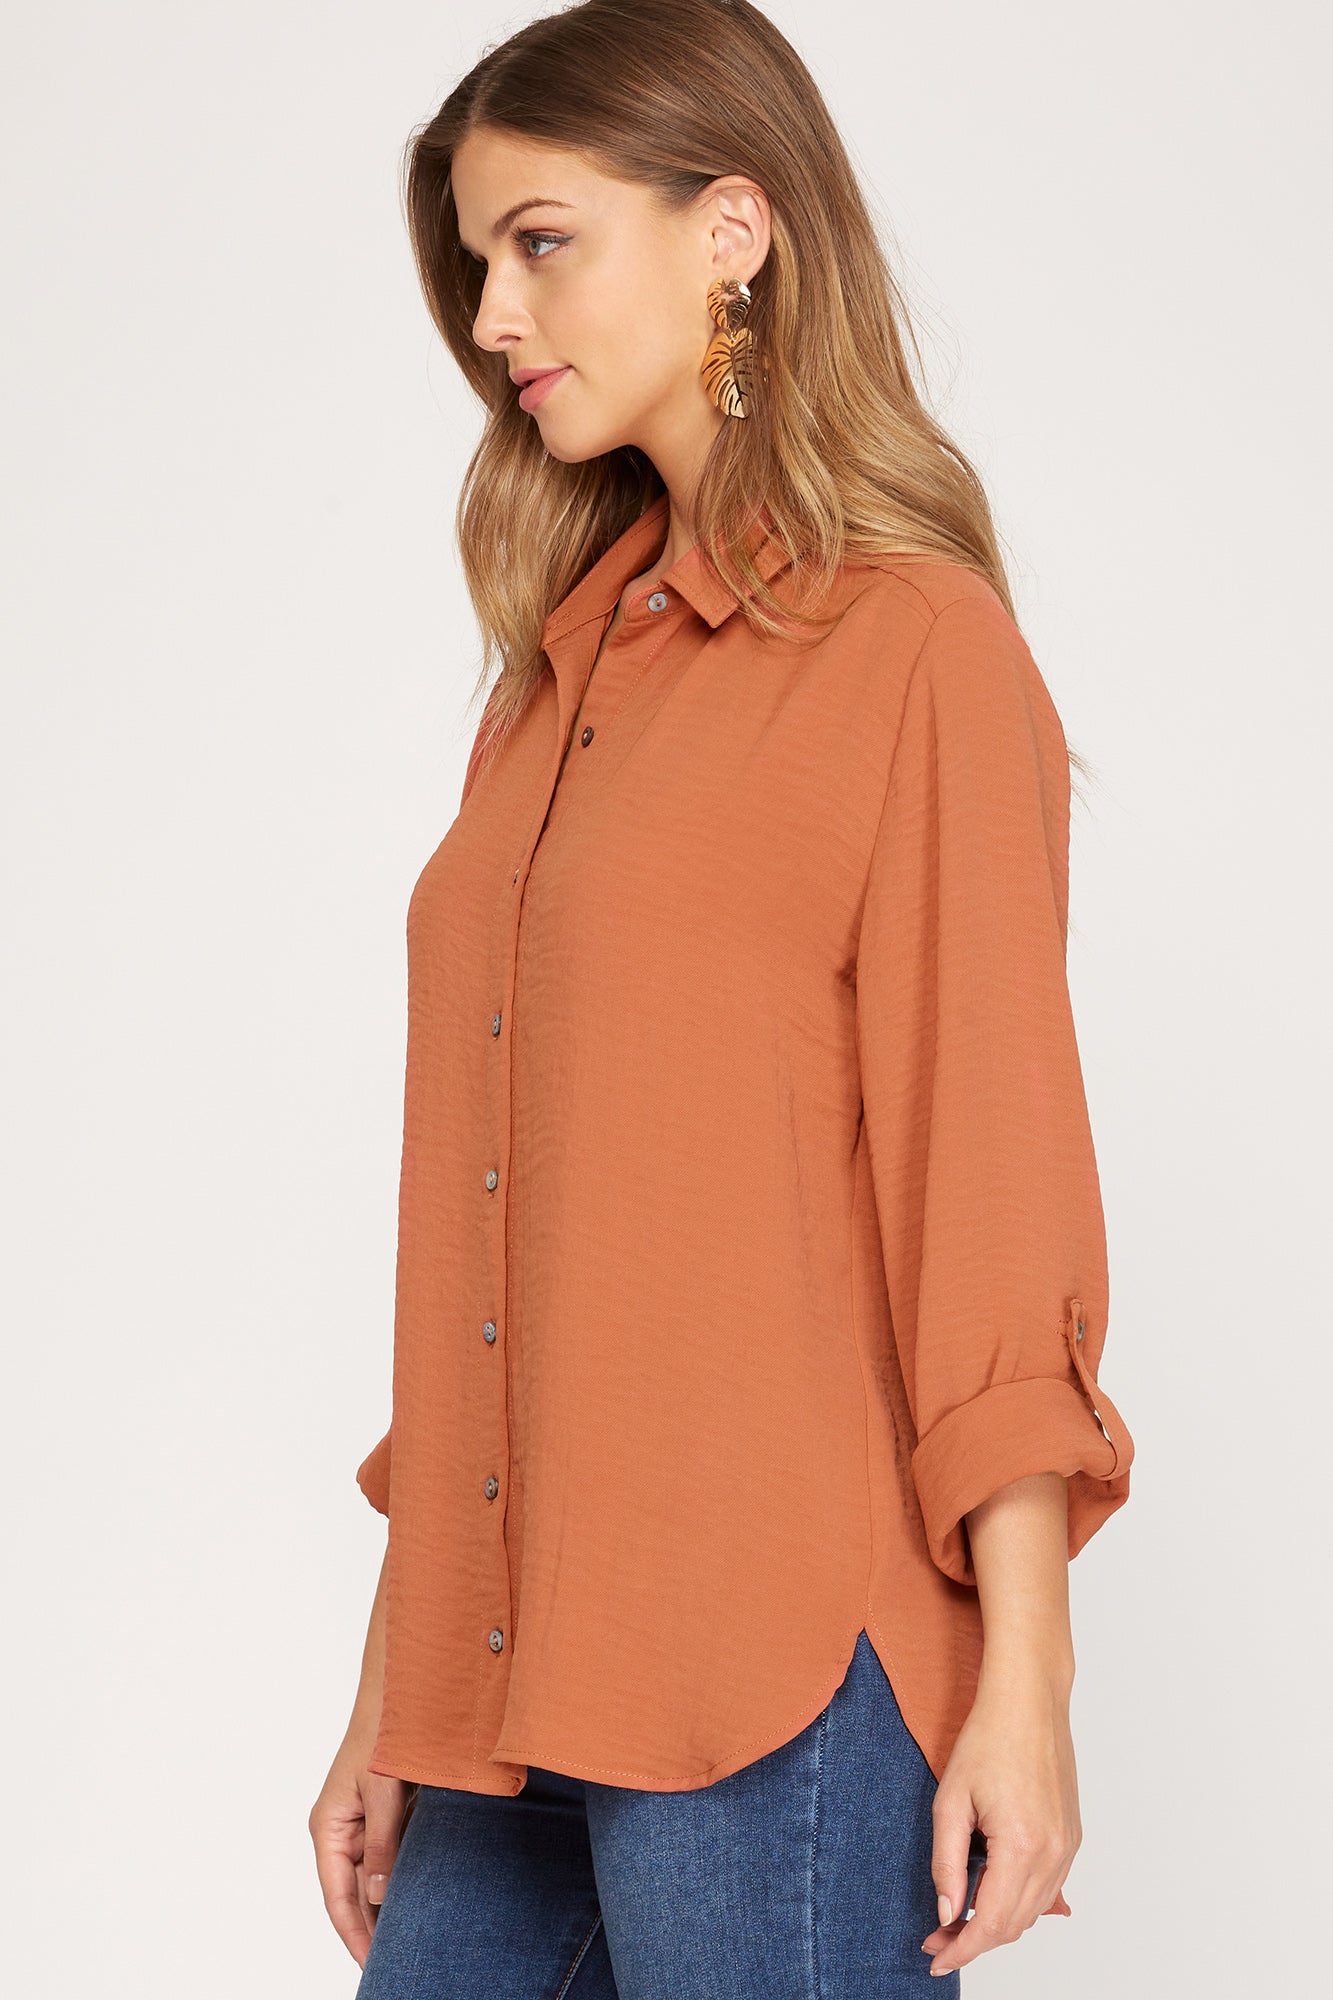 She & Sky Working All Day - Rust, long roll up sleeve, button down, collared  Edit alt text